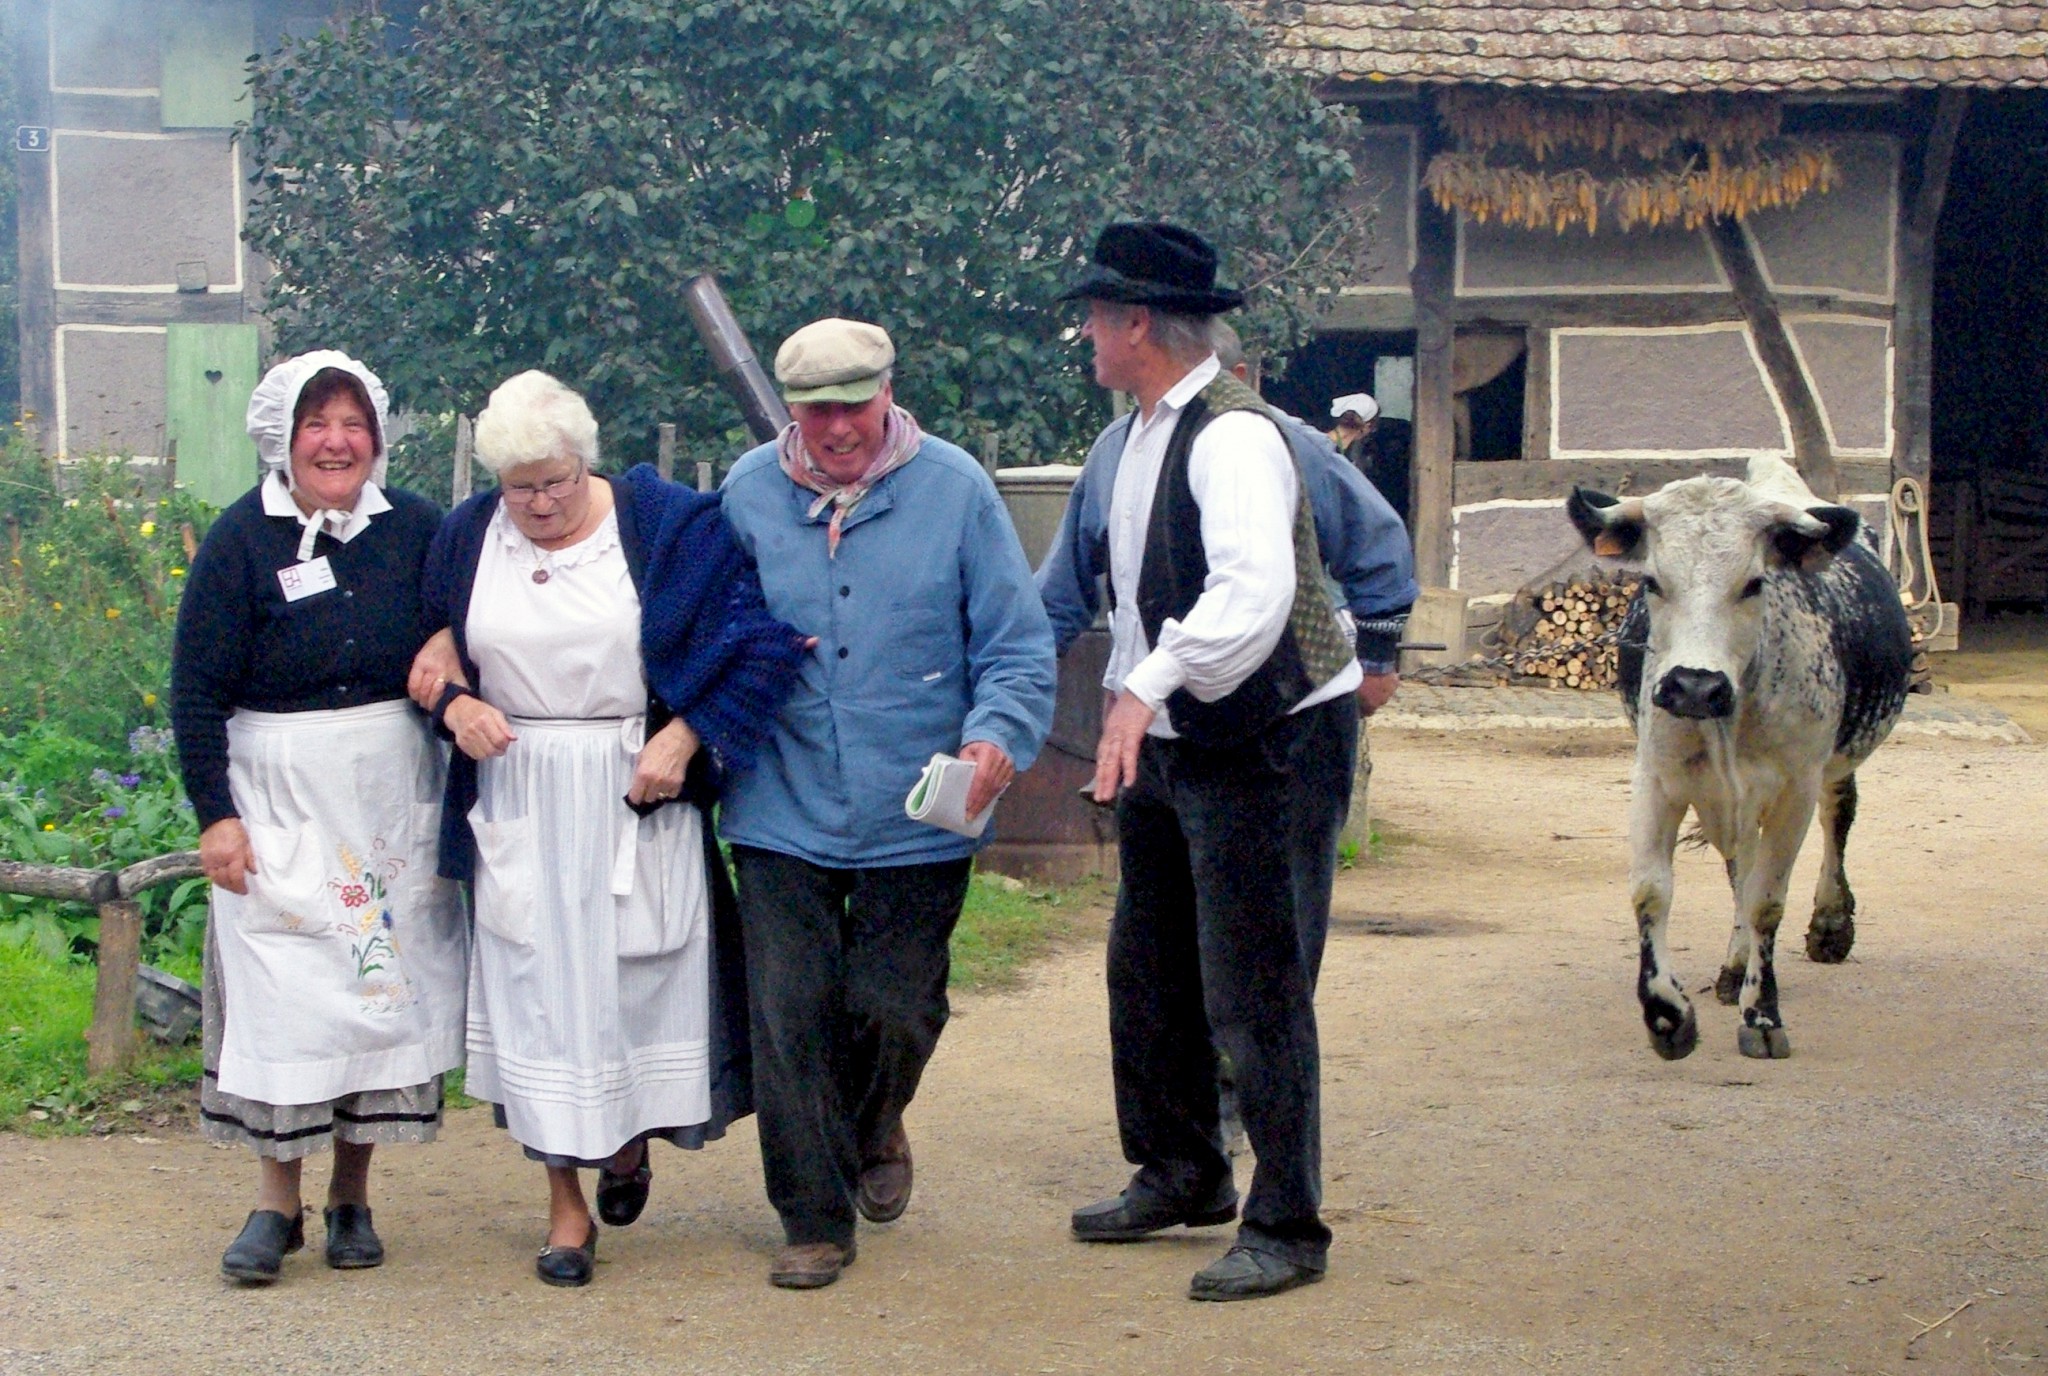 Costumed people at the Ecomusée d'Alsace © French Moments